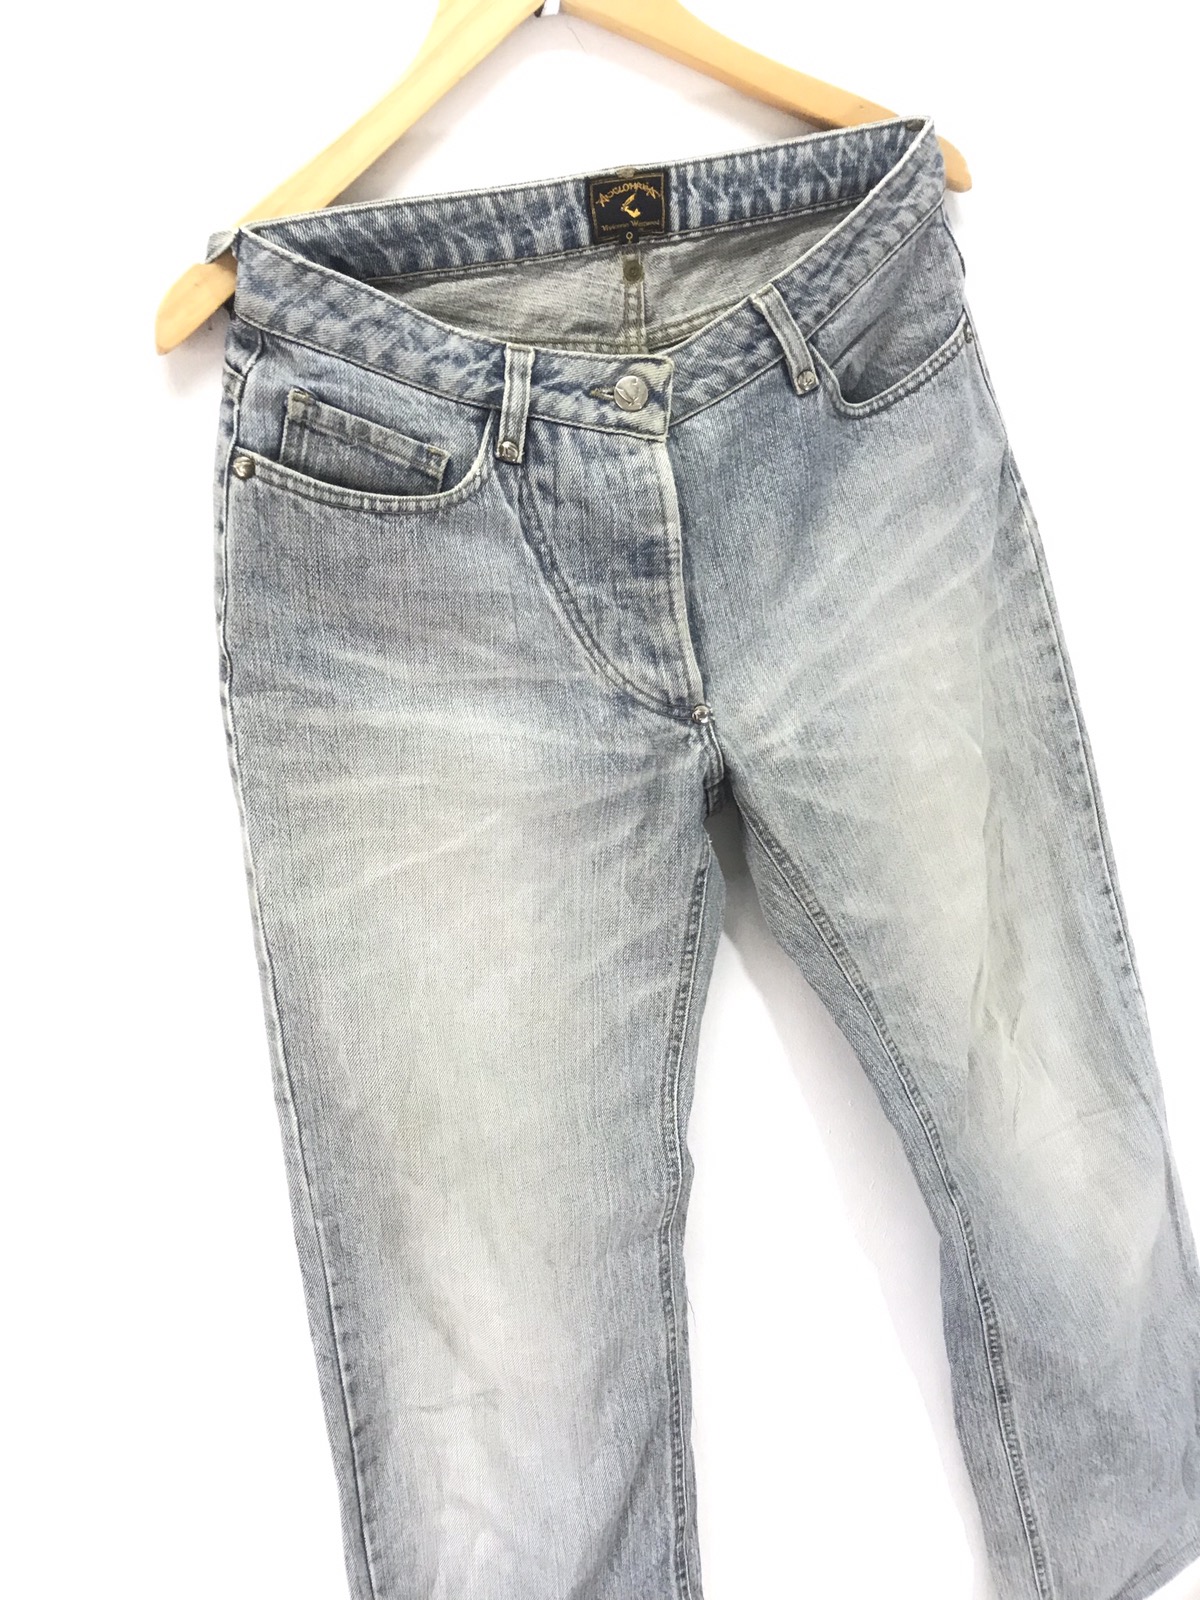 🔥Vivienne Westwood Anglomania Faded Session Jean - 7